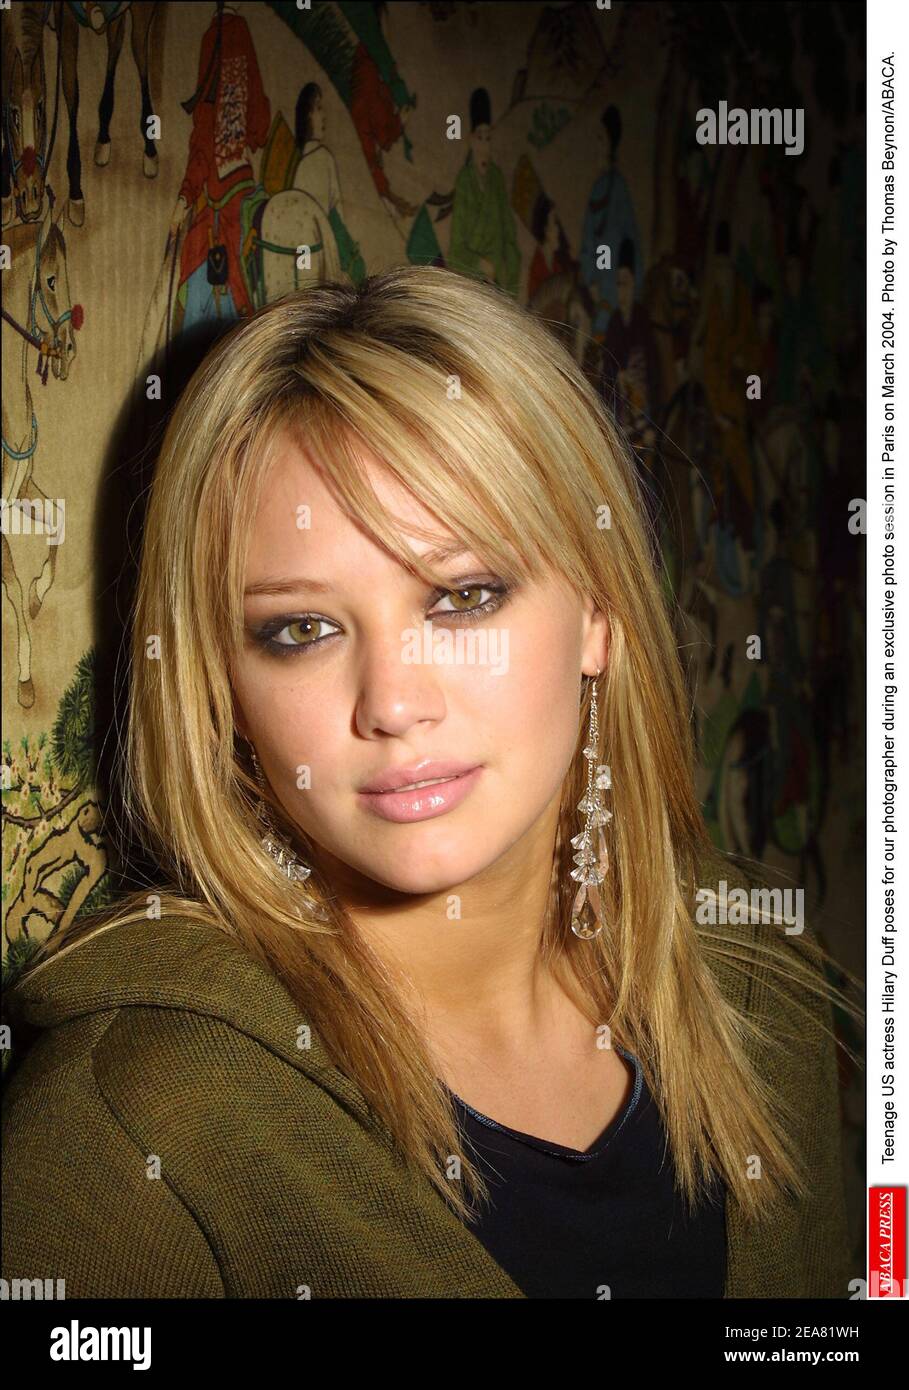 Teenage US actress Hilary Duff poses for our photographer during an exclusive photo session in Paris on March 2004. Photo by Thomas Beynon/ABACA. Stock Photo